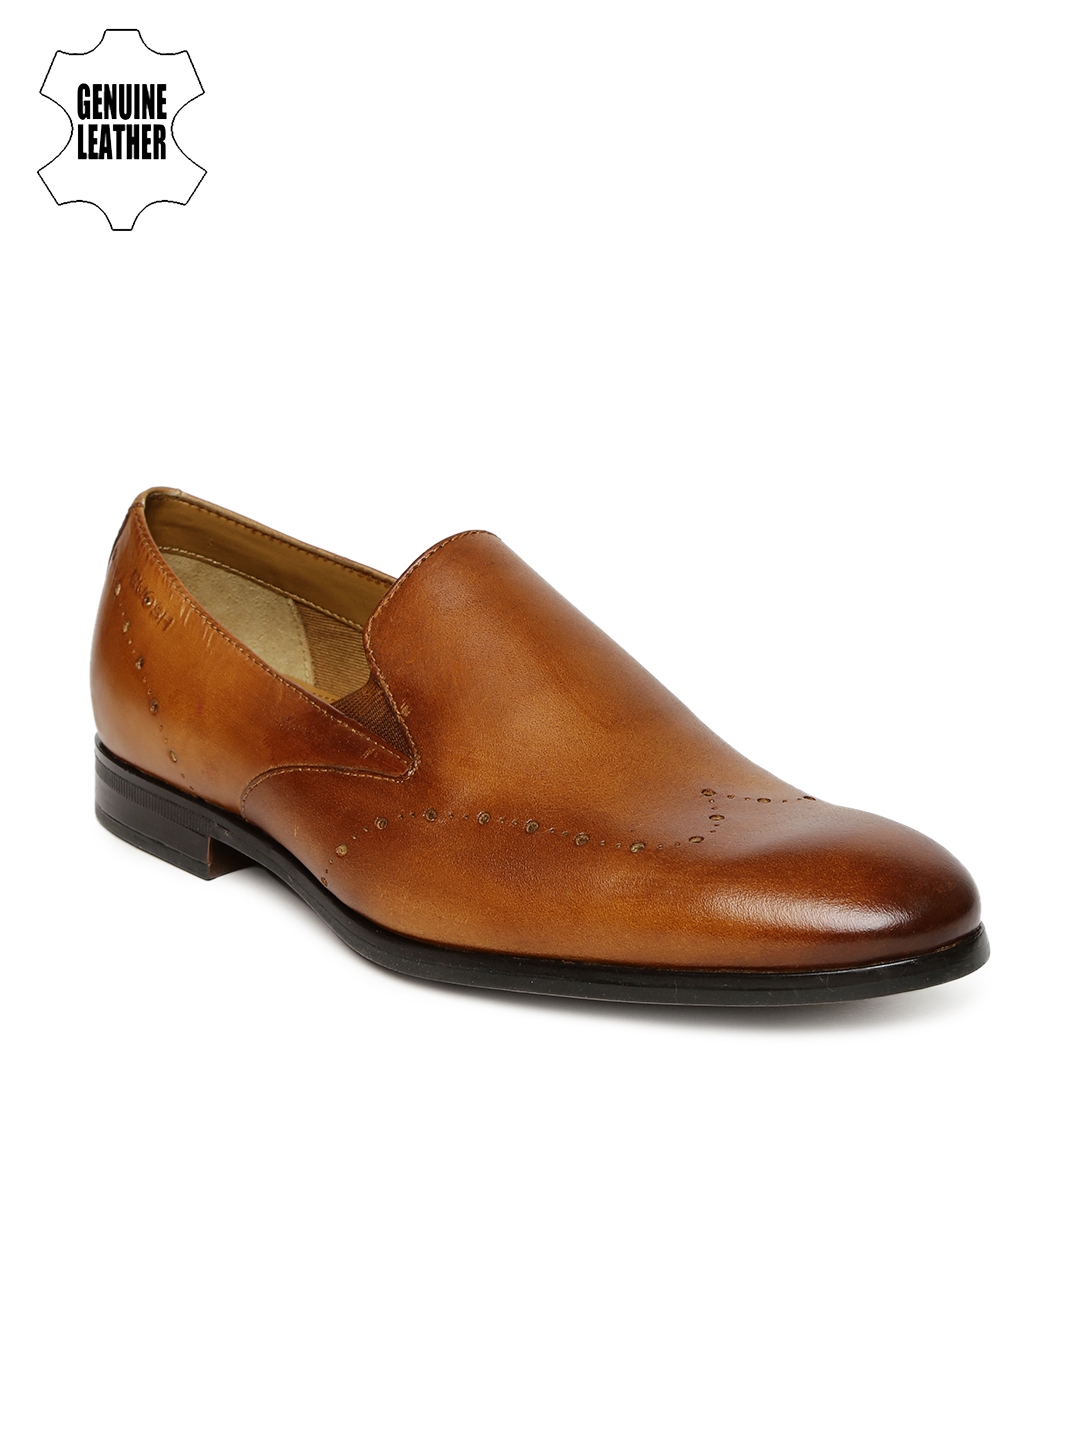 Genuine Leather Formal Slip On Shoes 